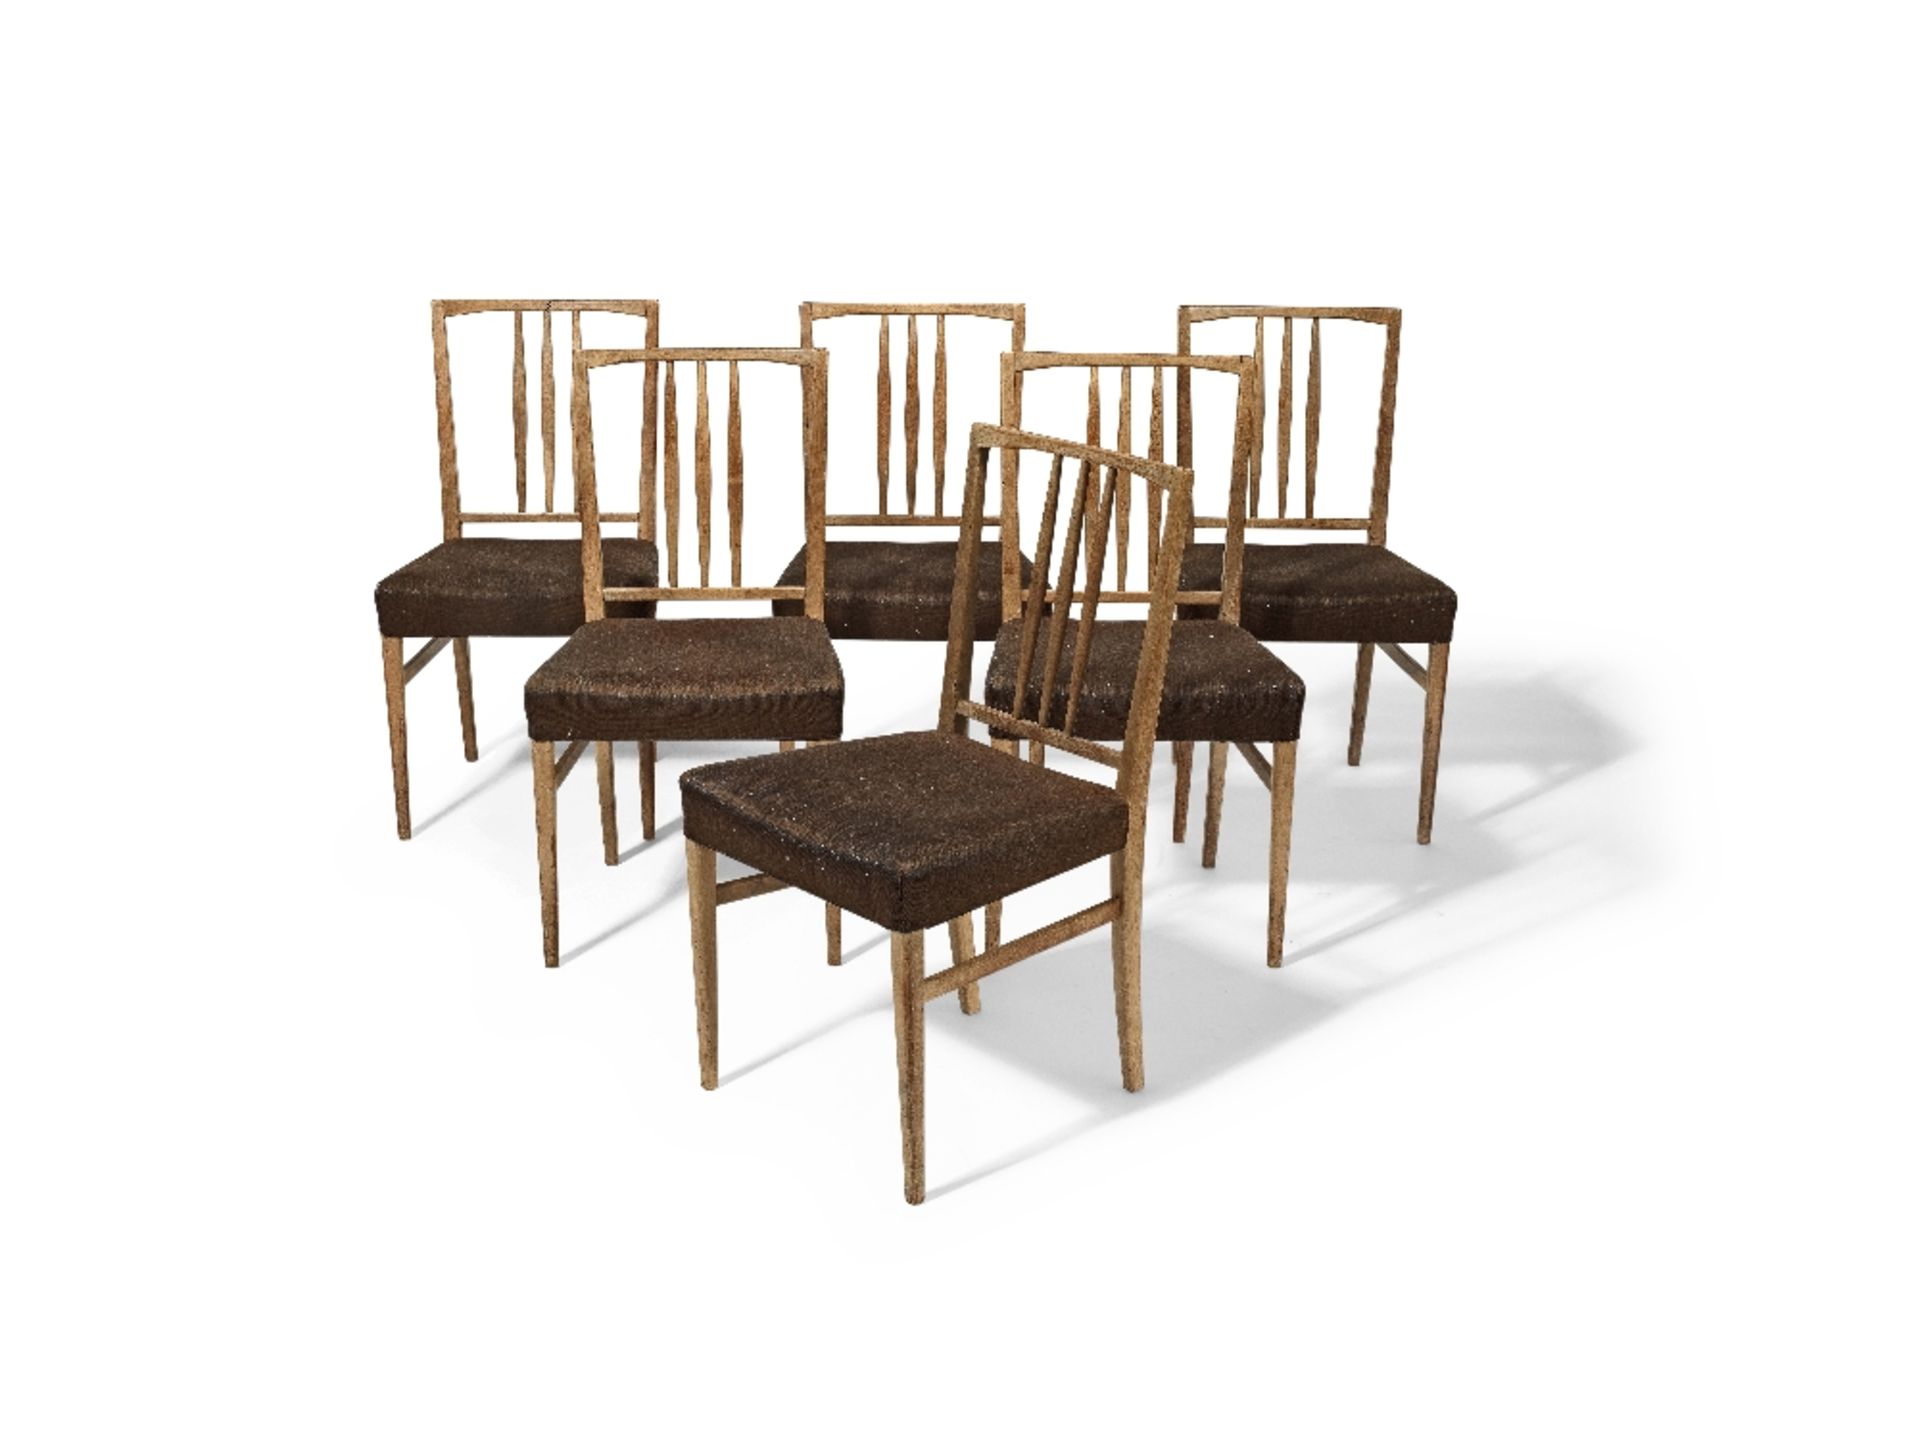 W.H. Russell for Gordon Russell Ltd. Set of six walnut chairs, designed 1950